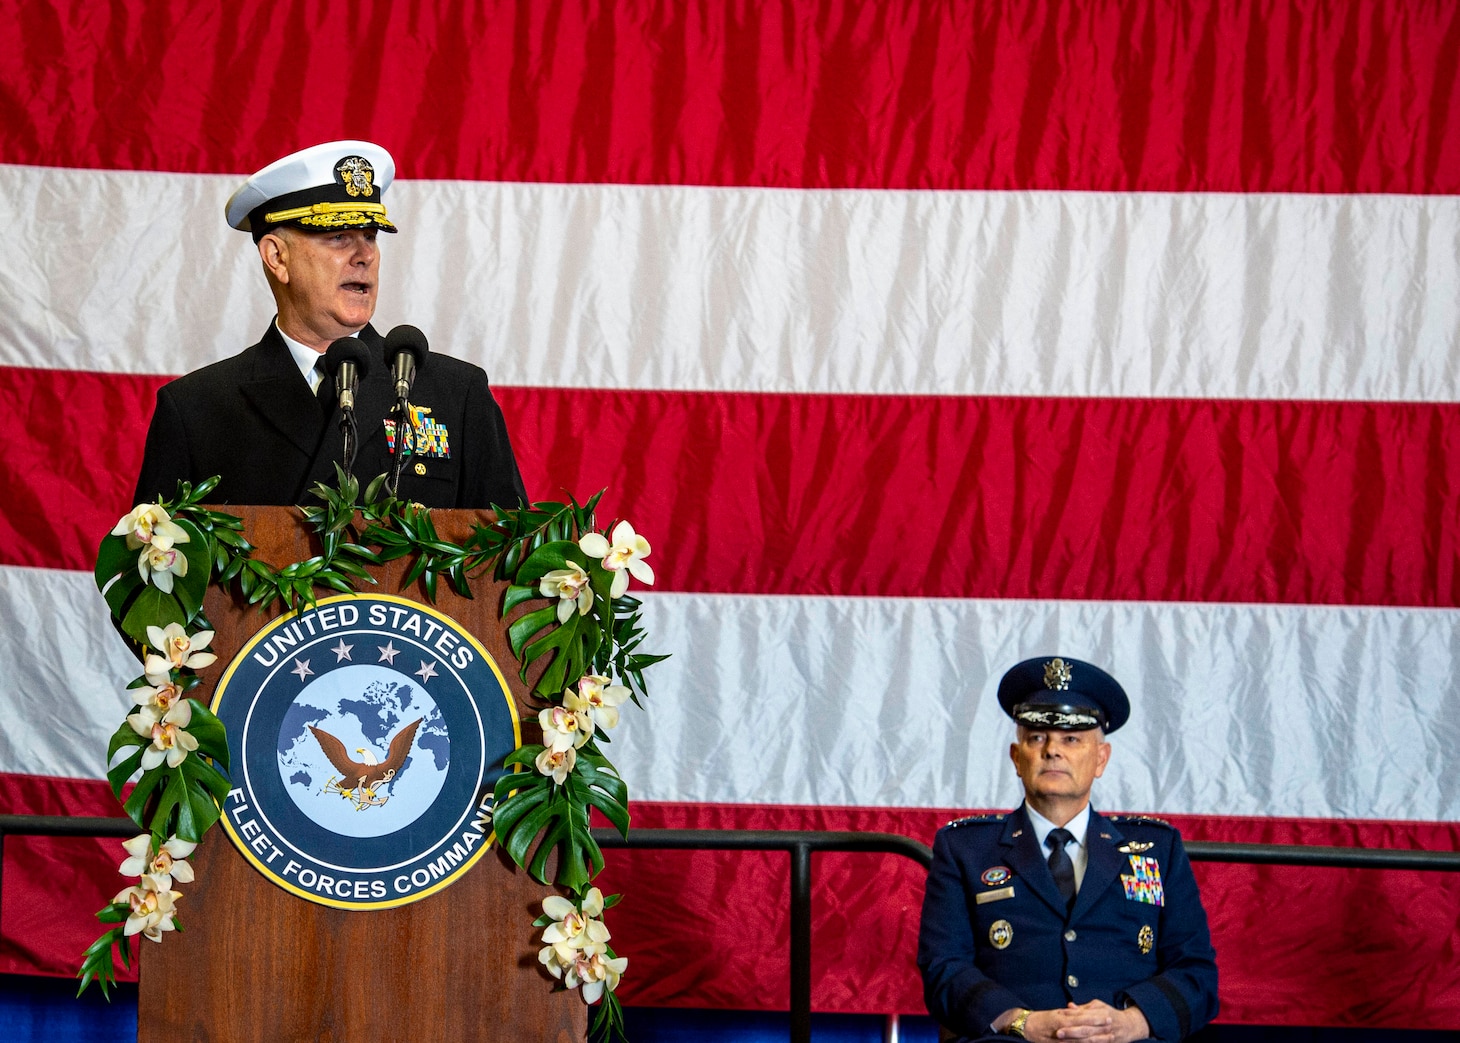 Adm. Christopher W. Grady, commander, U.S. Fleet Forces Command (USFFC) delivers his final remarks before being relieved by Adm. Daryl Caudle, not shown, during the USFFC change of command ceremony aboard USS George H. W. Bush (CVN 77), Dec. 7, 2021.